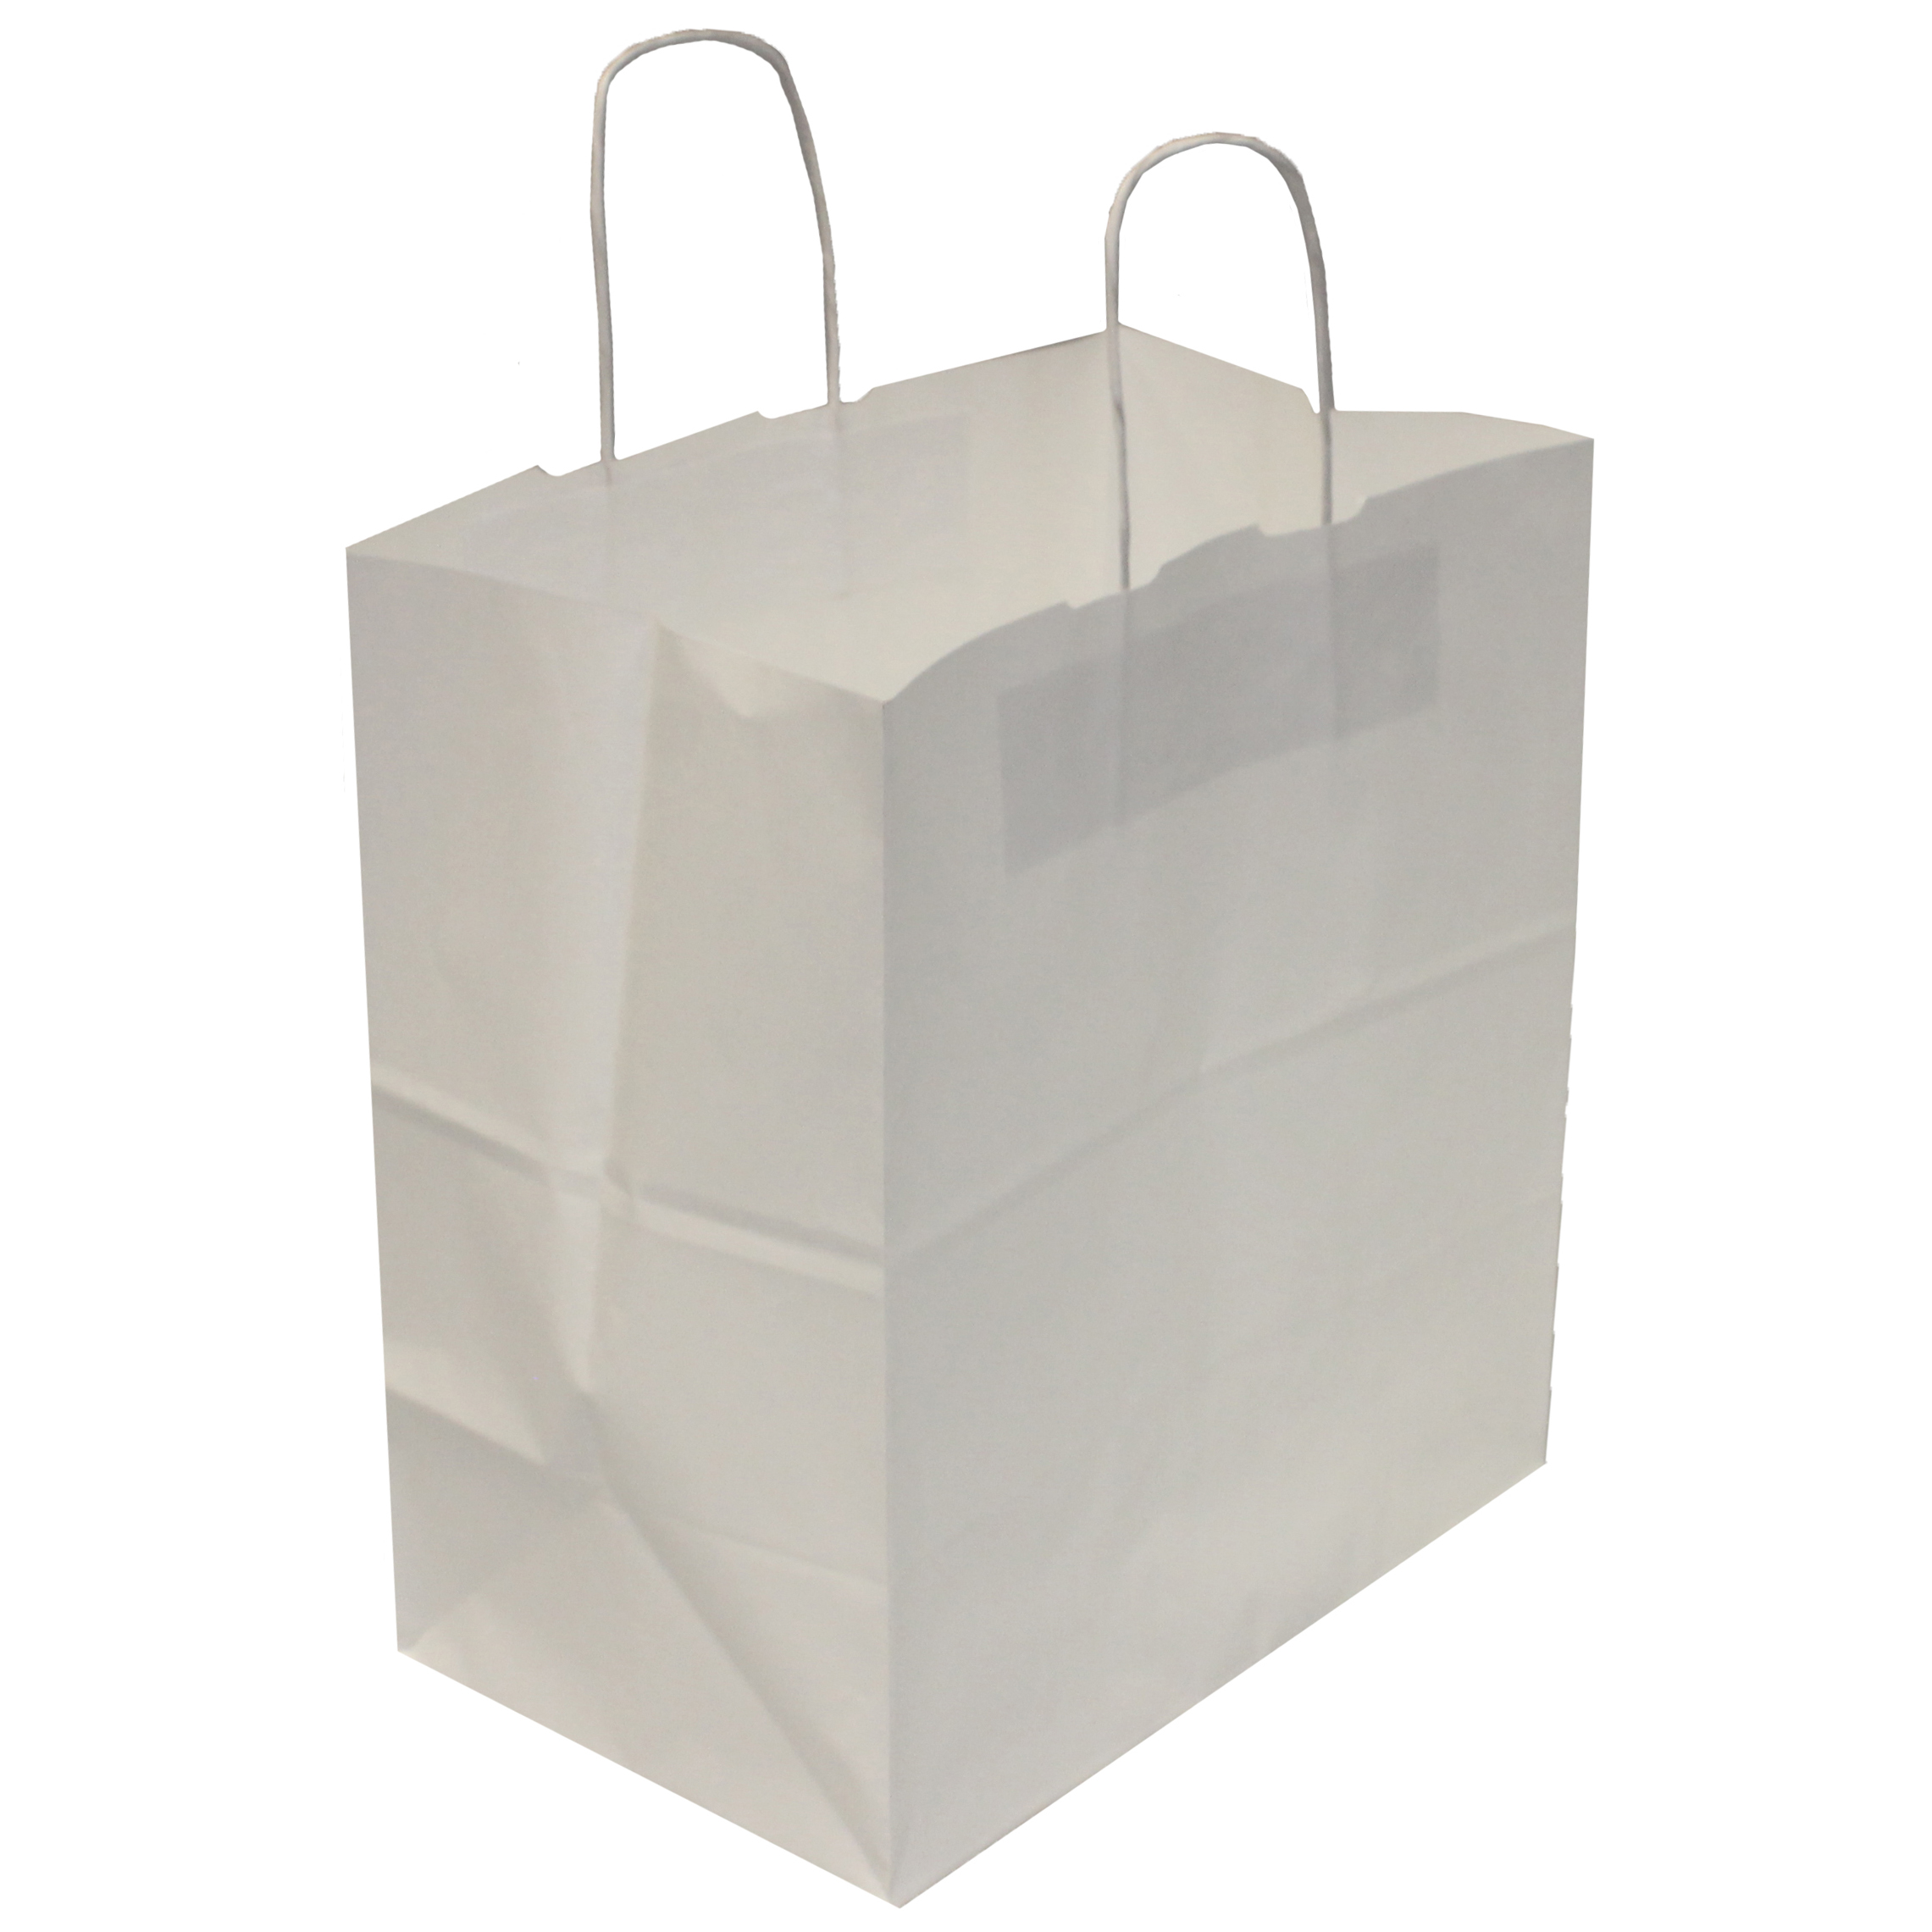 Bundle of 25 craft paper bags of (2 POUND CAKE BOX SIZE) 10.9 x 10.2 x 10.2  inches , suitable for using as shopping bag, gift bag, goodies bag,  merchandise and retail